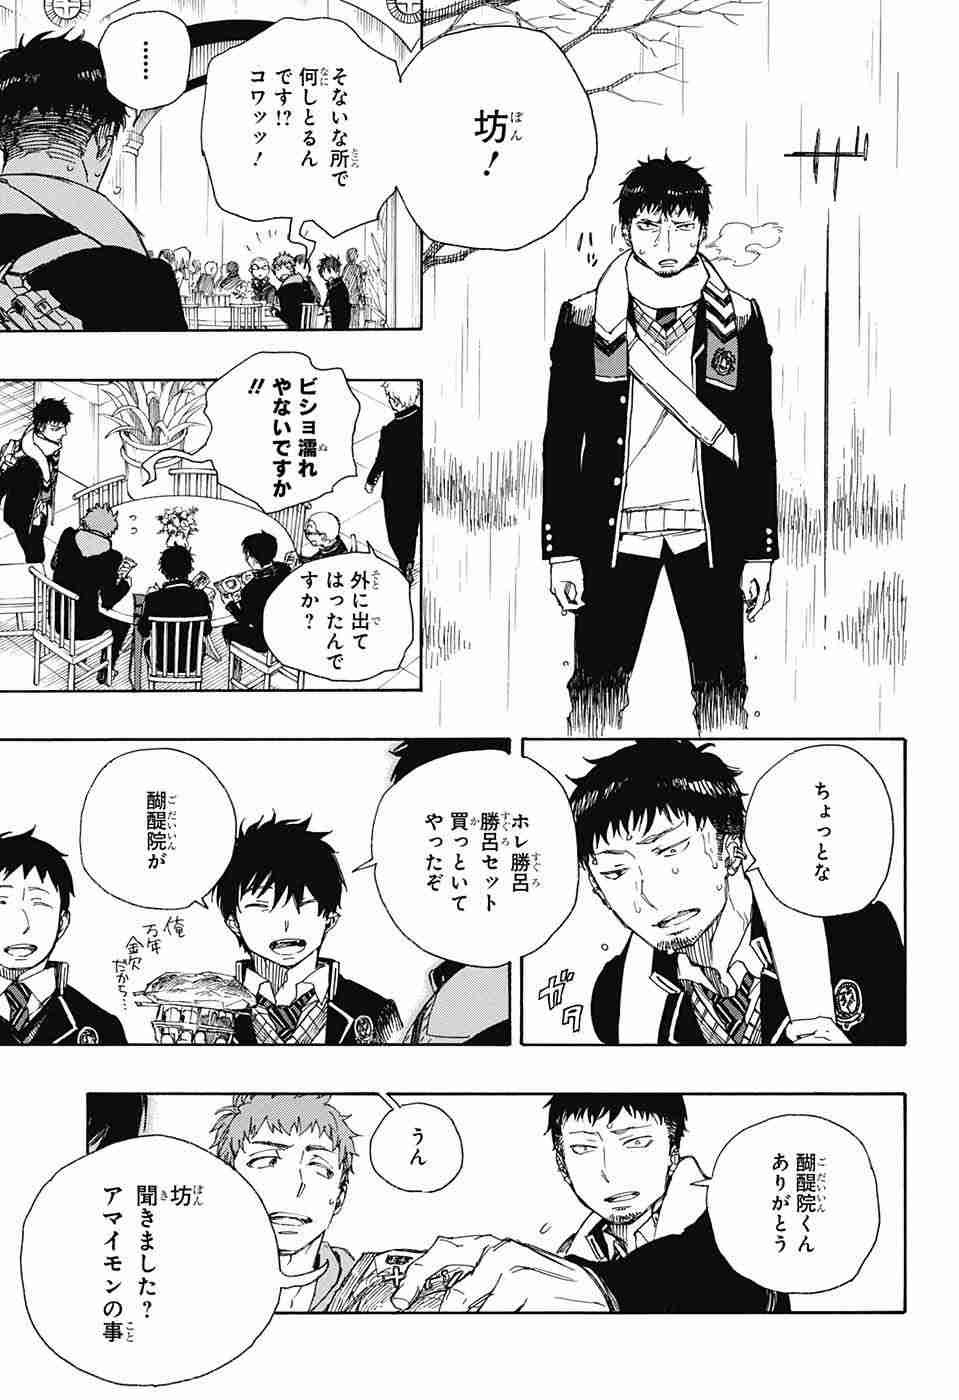 Ao no Exorcist - Chapter 84 - Page 3